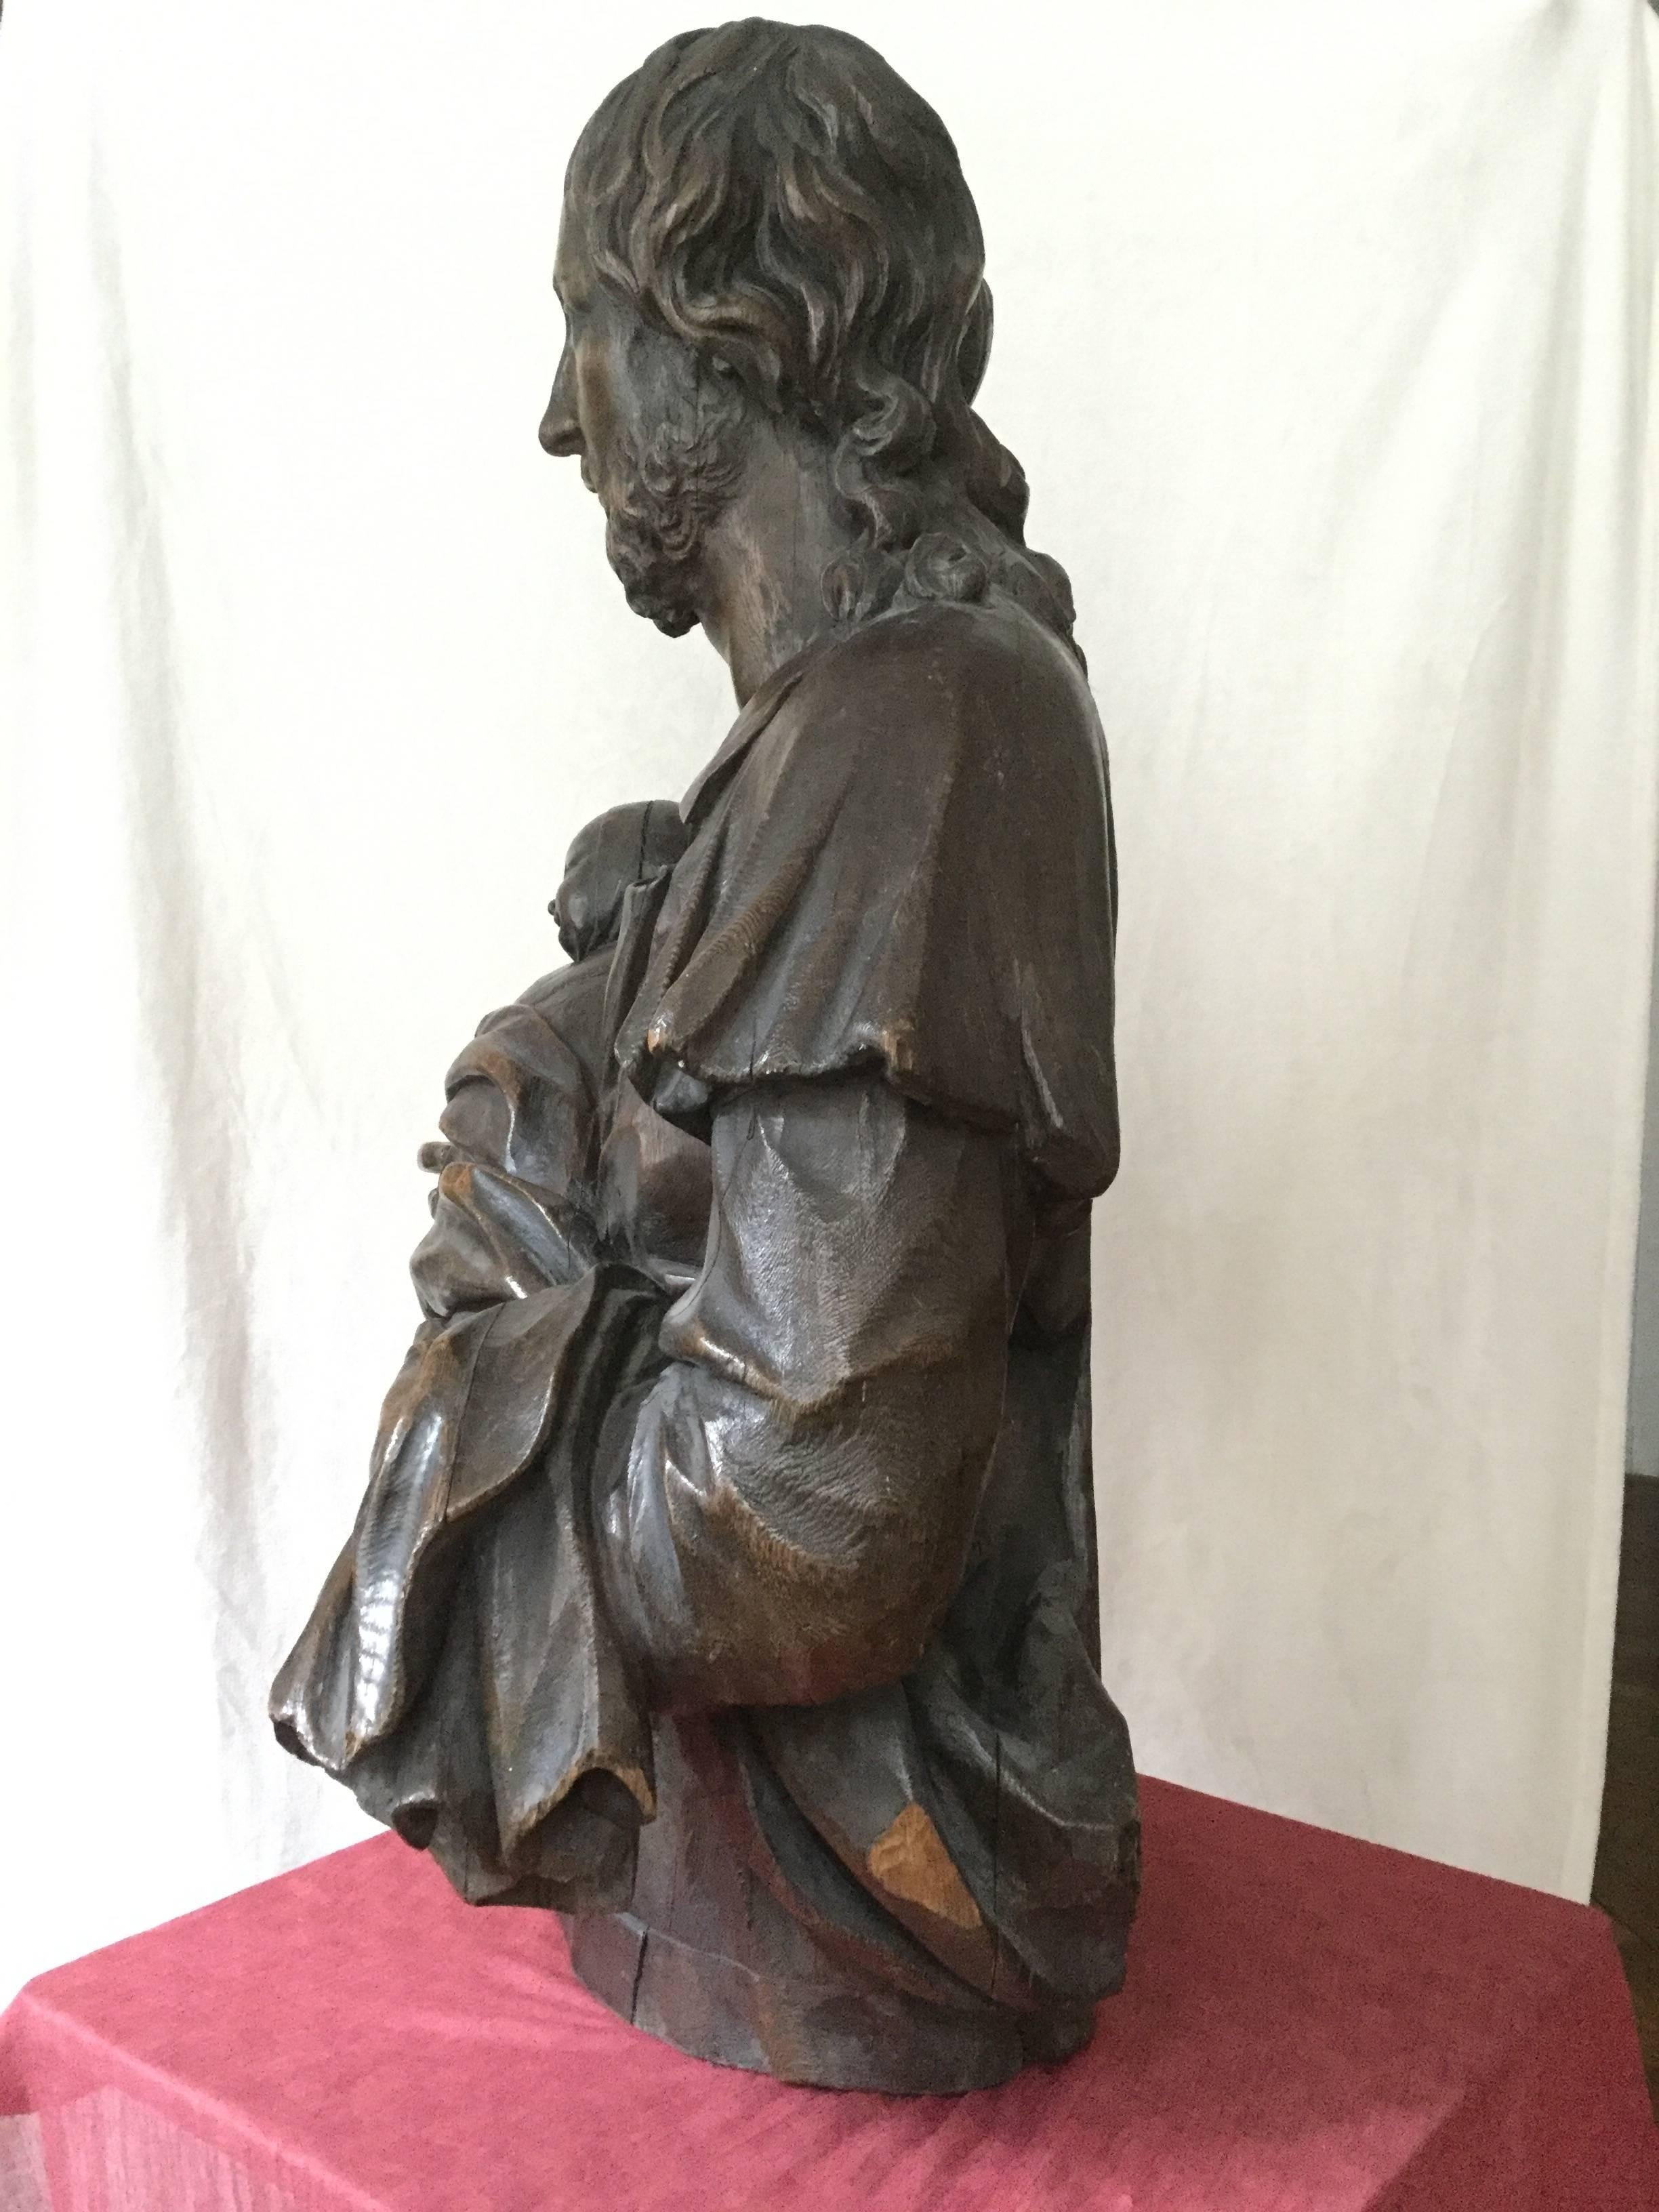  A sculpture representing an Oak bust of  the Christ holding a child swaddled in arms. Austrian School 18th century 
One may think that there is the image of Christ letting the little children come to him; Gospel of Matthew, 19:14
This kind of